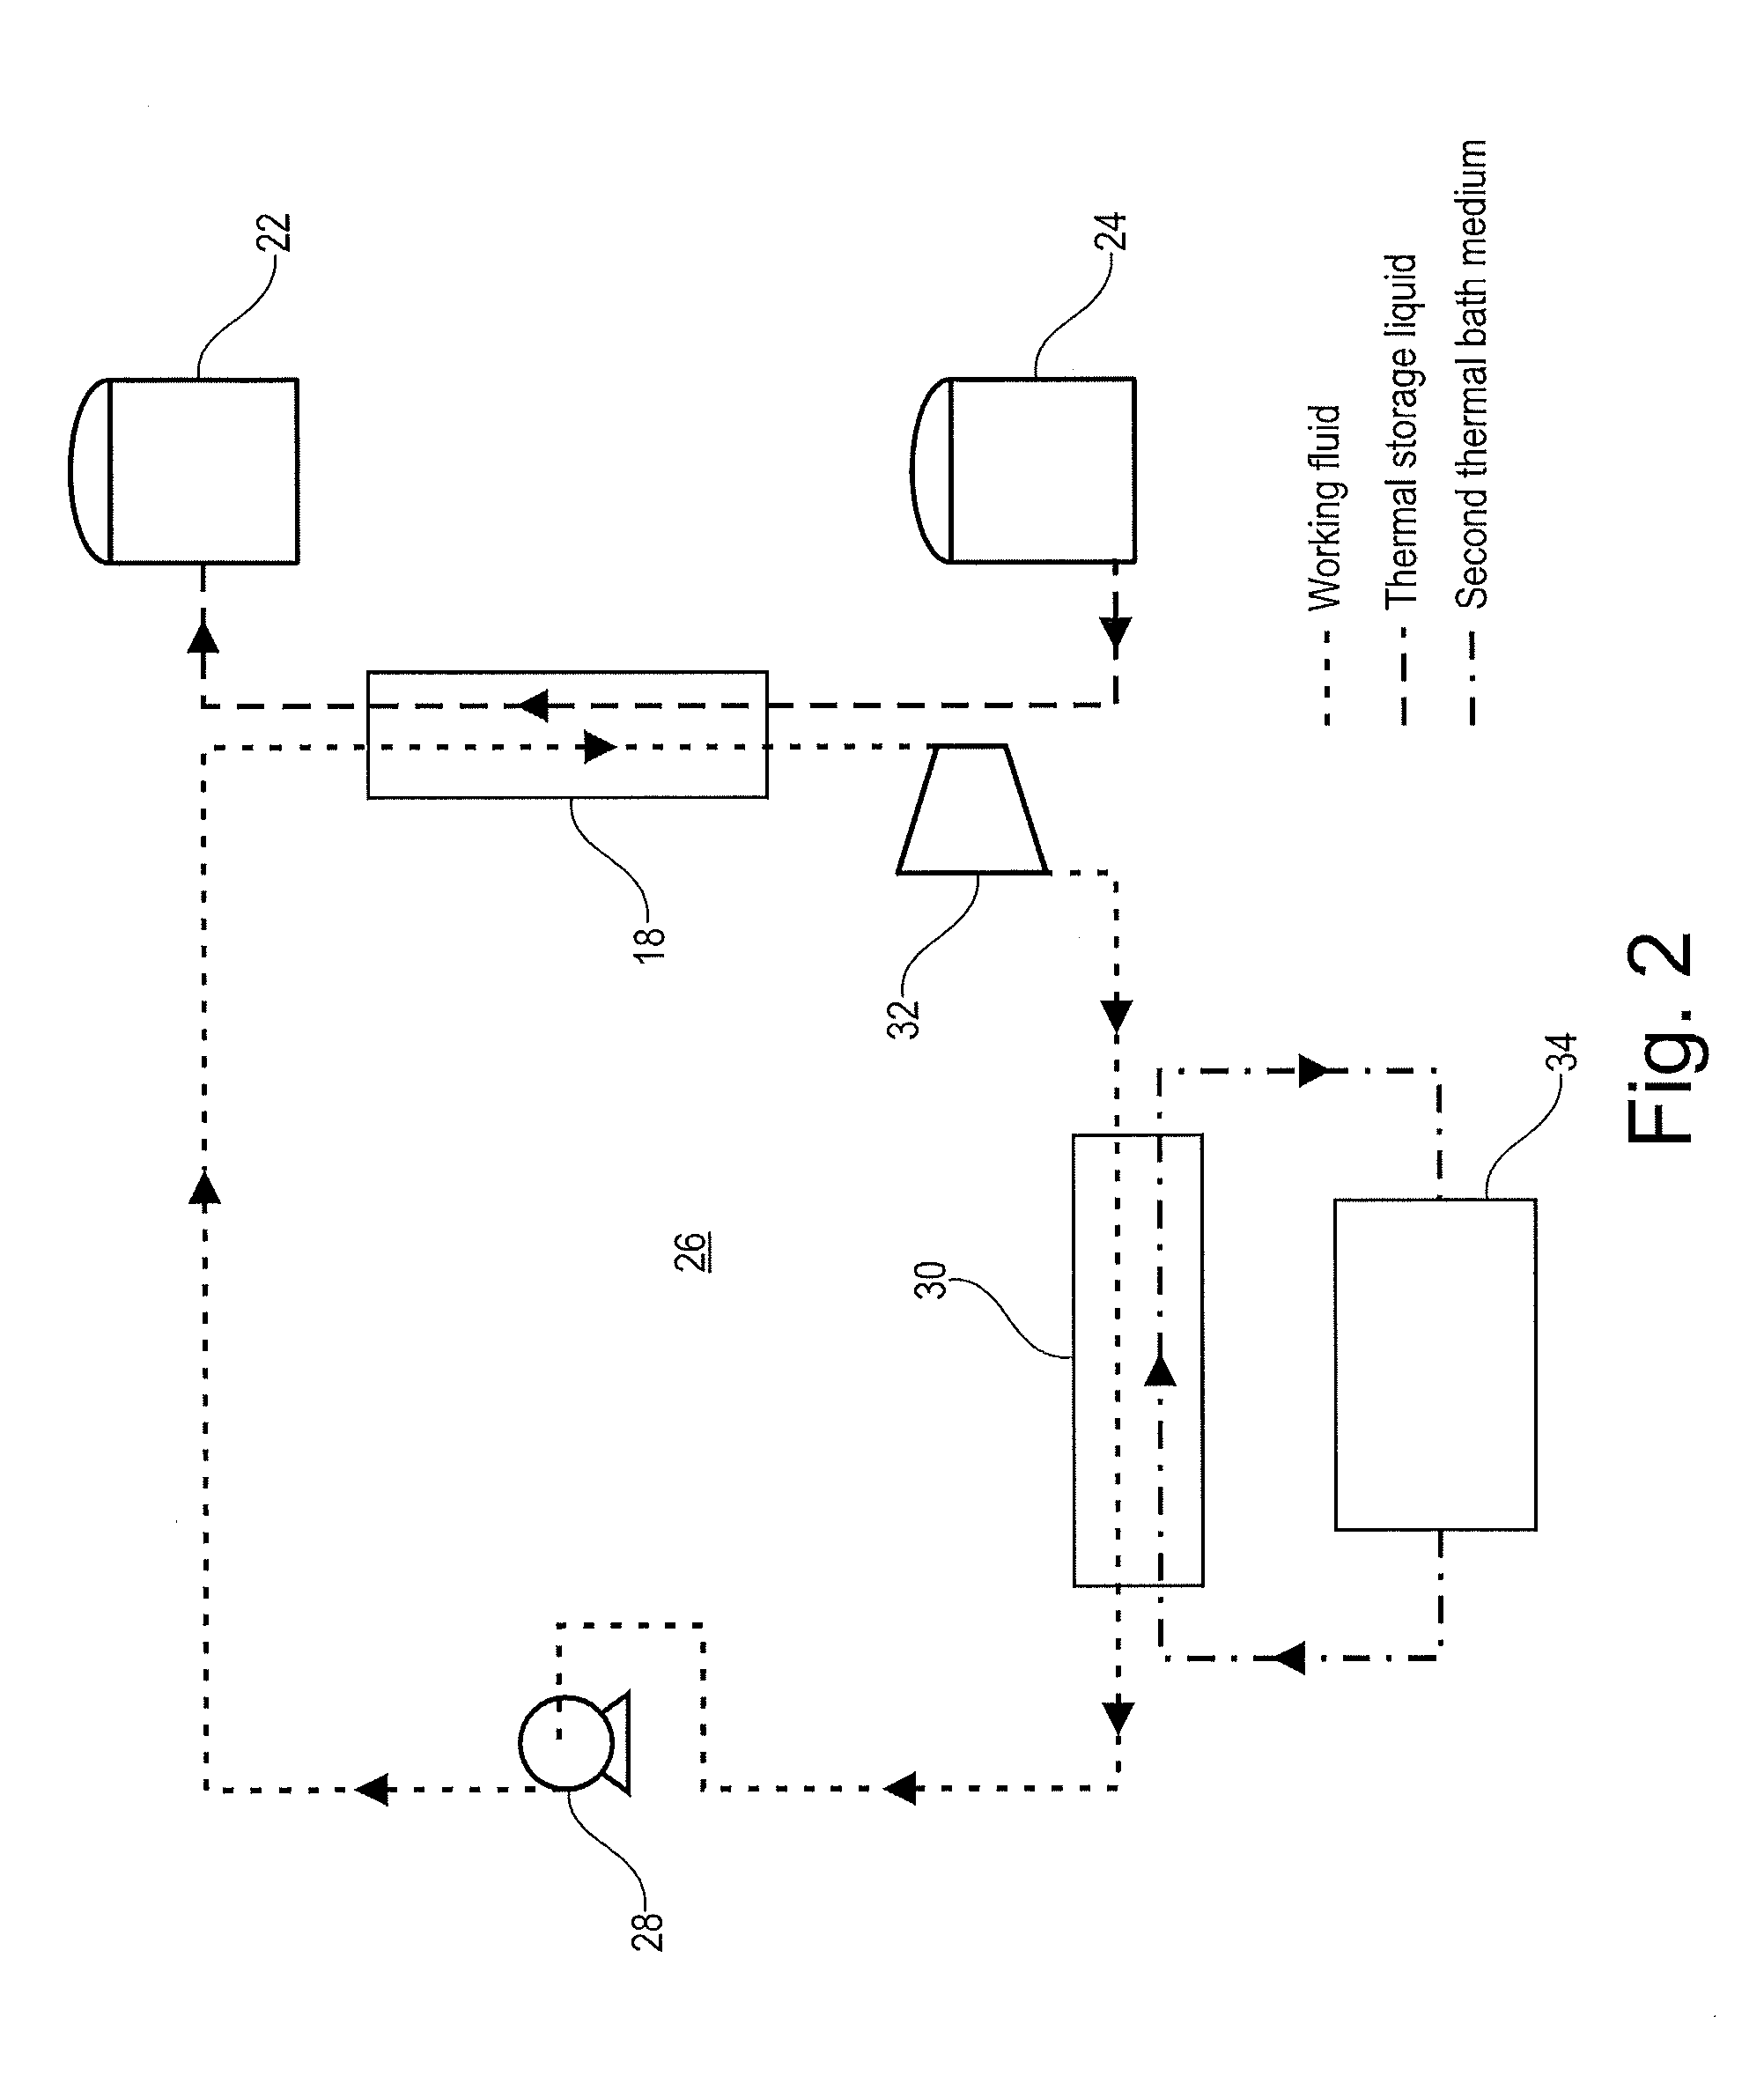 Thermoelectric energy storage system having two thermal baths and method for storing thermoelectric energy